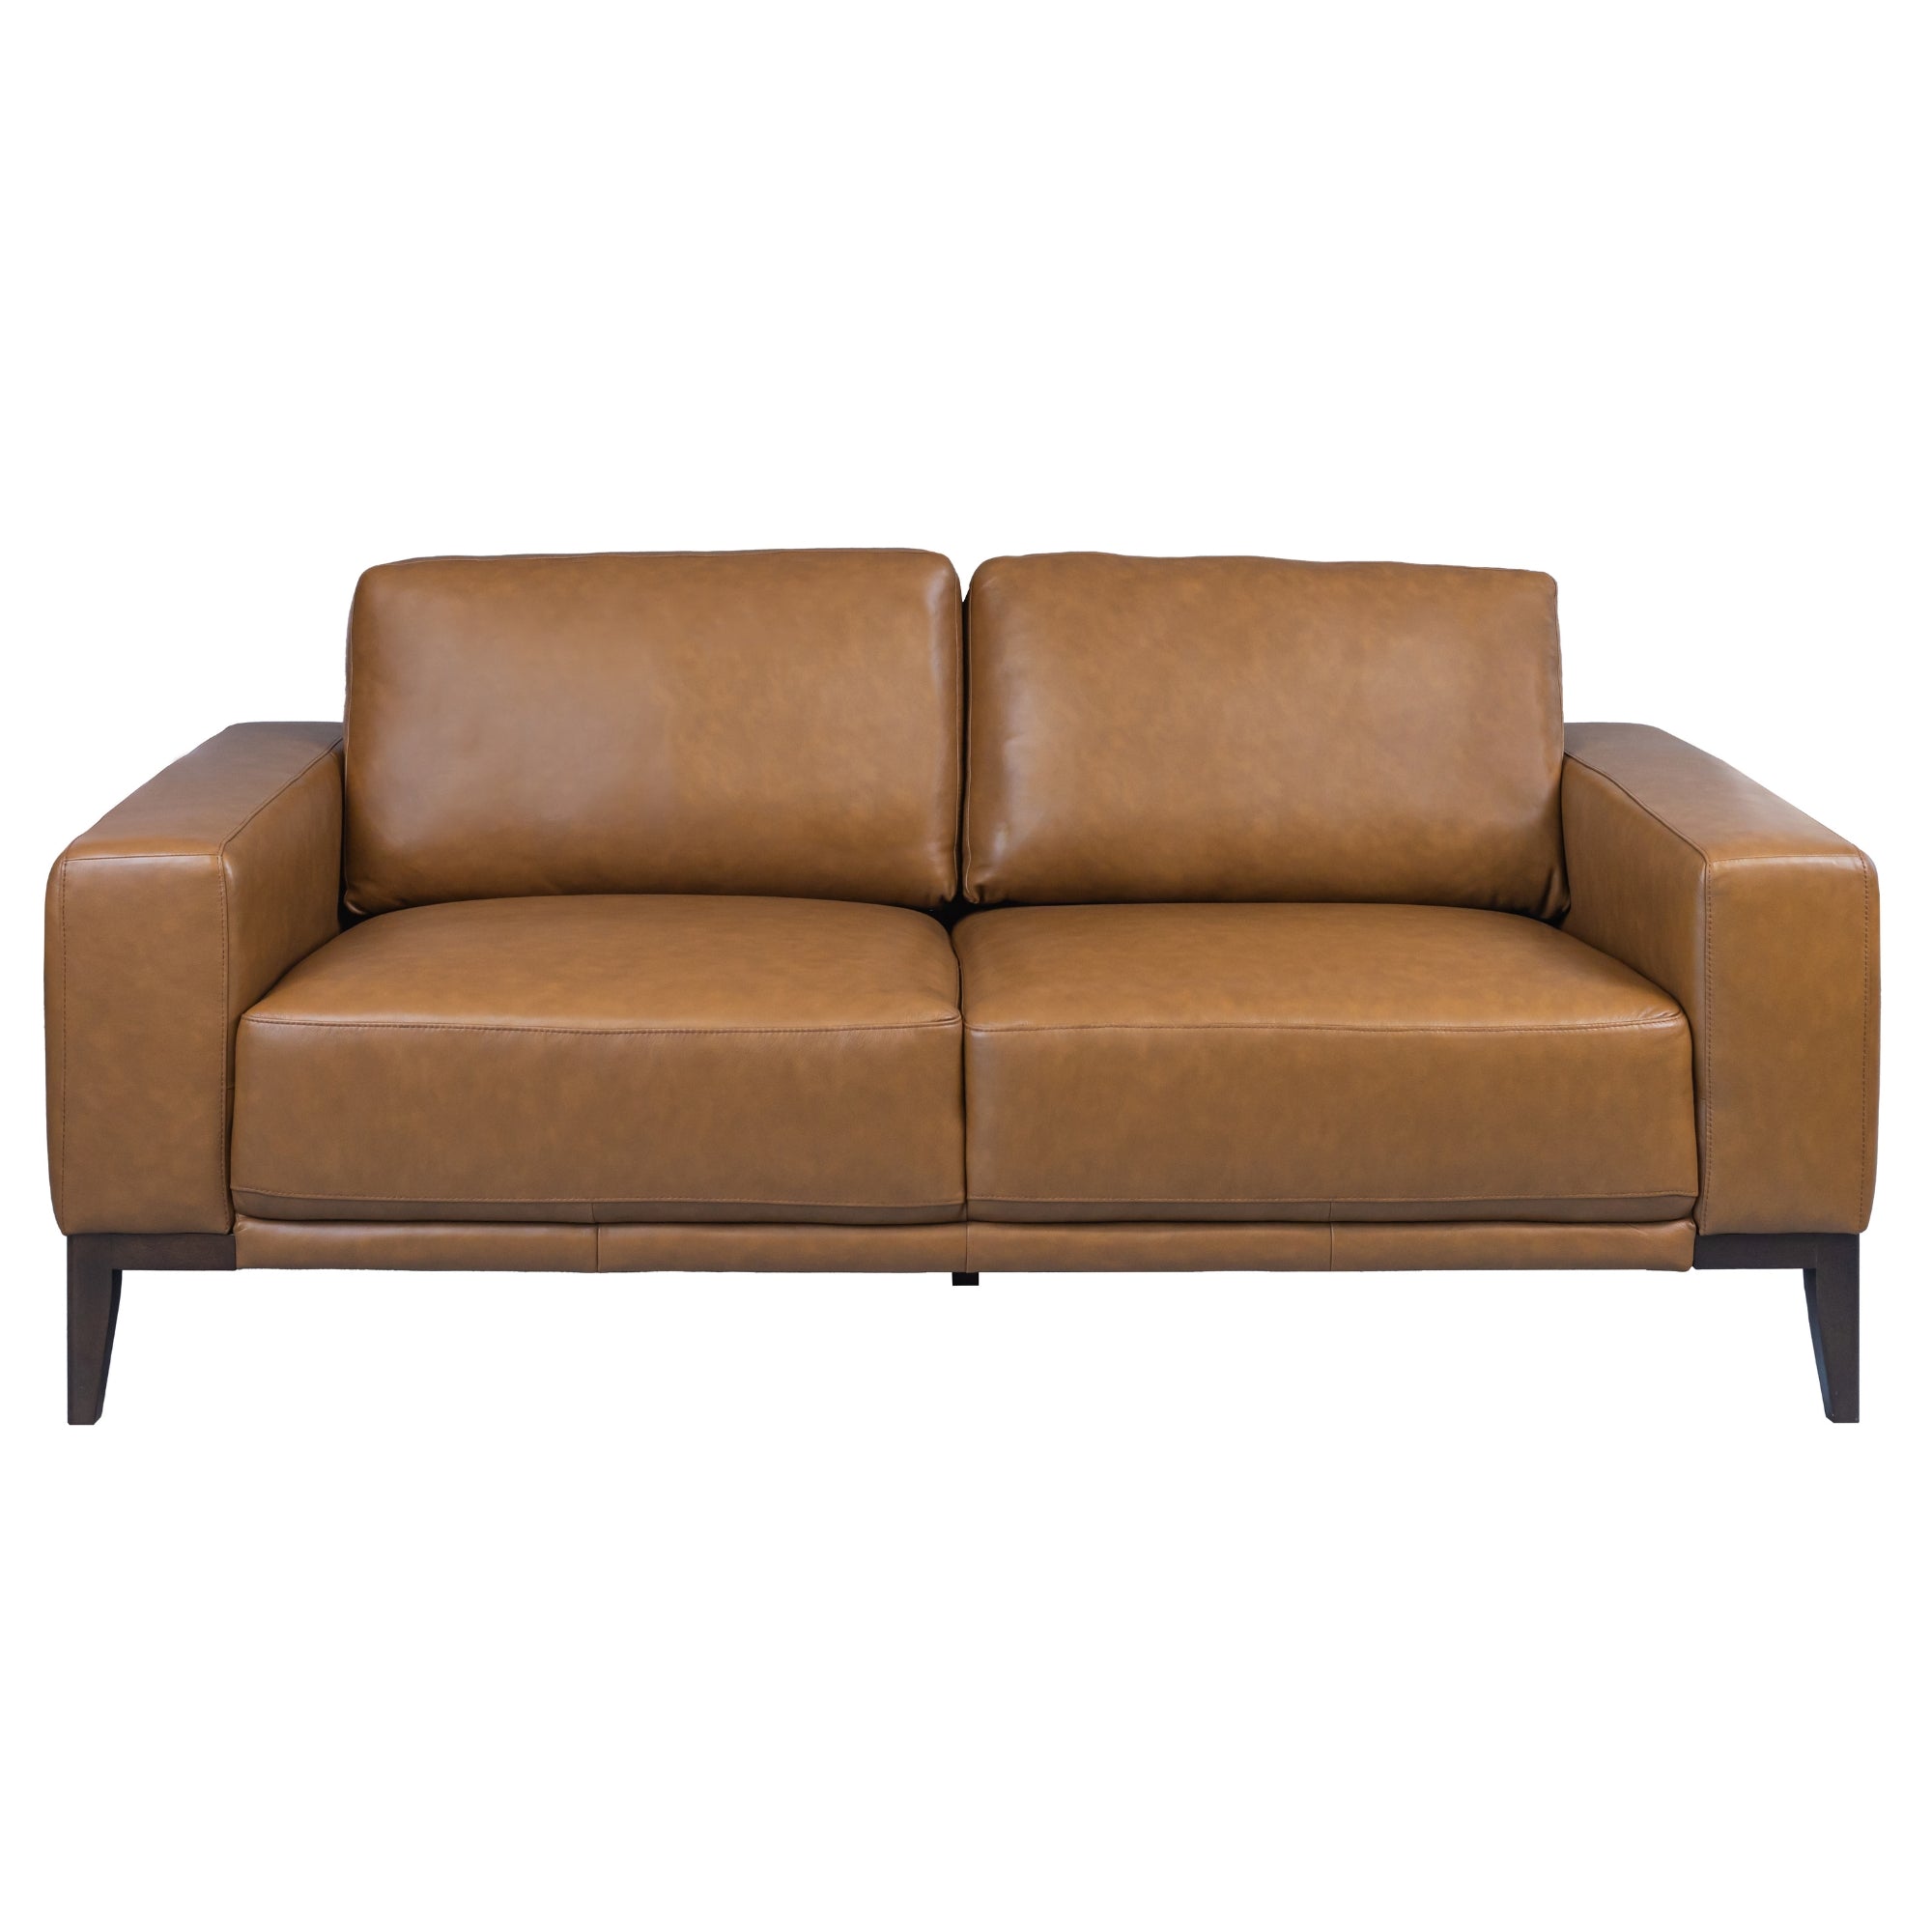 Modern Tan Leather 3-Seater Sofa, Wide Arms, Durable Frame